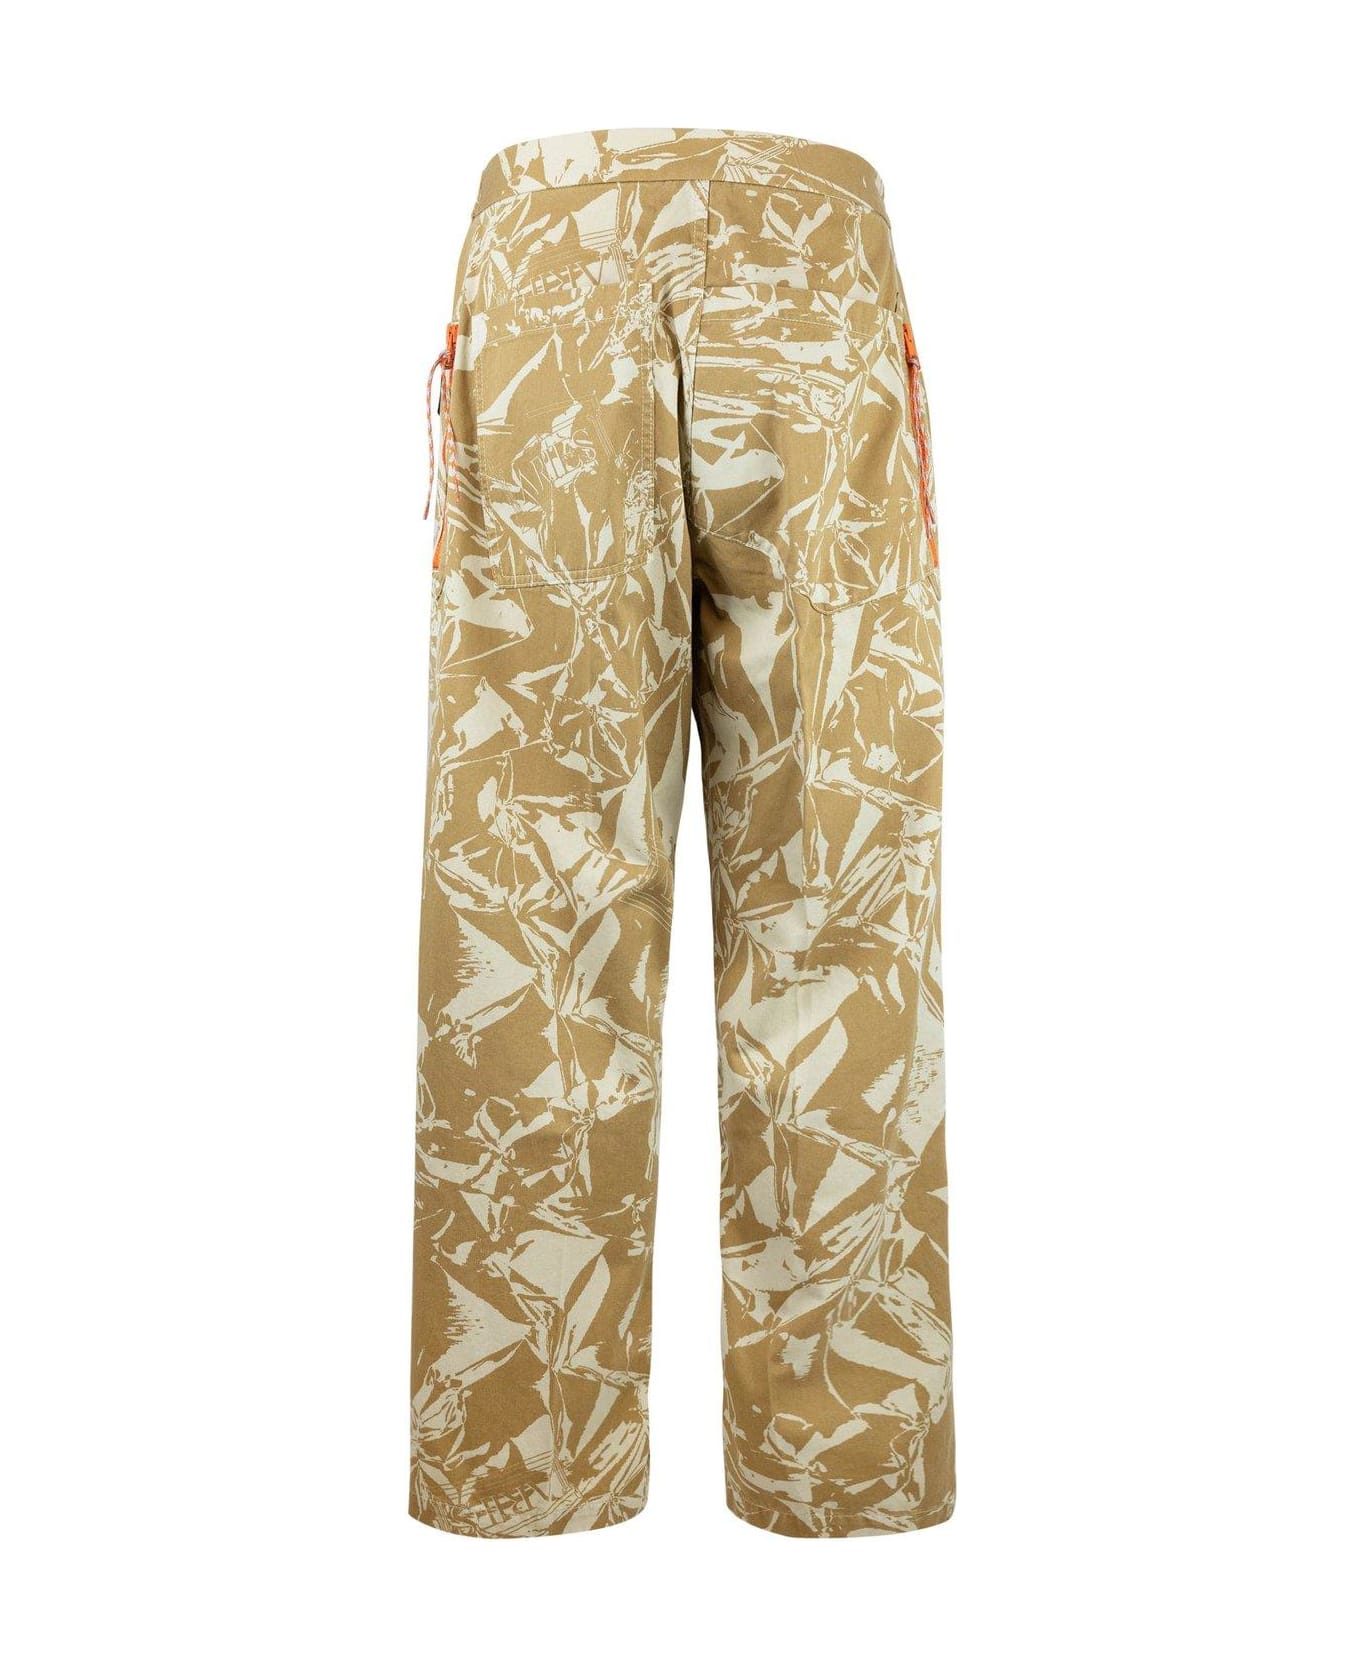 Aries Camouflage Printed Cargo Pants - CAMOUFLAGE